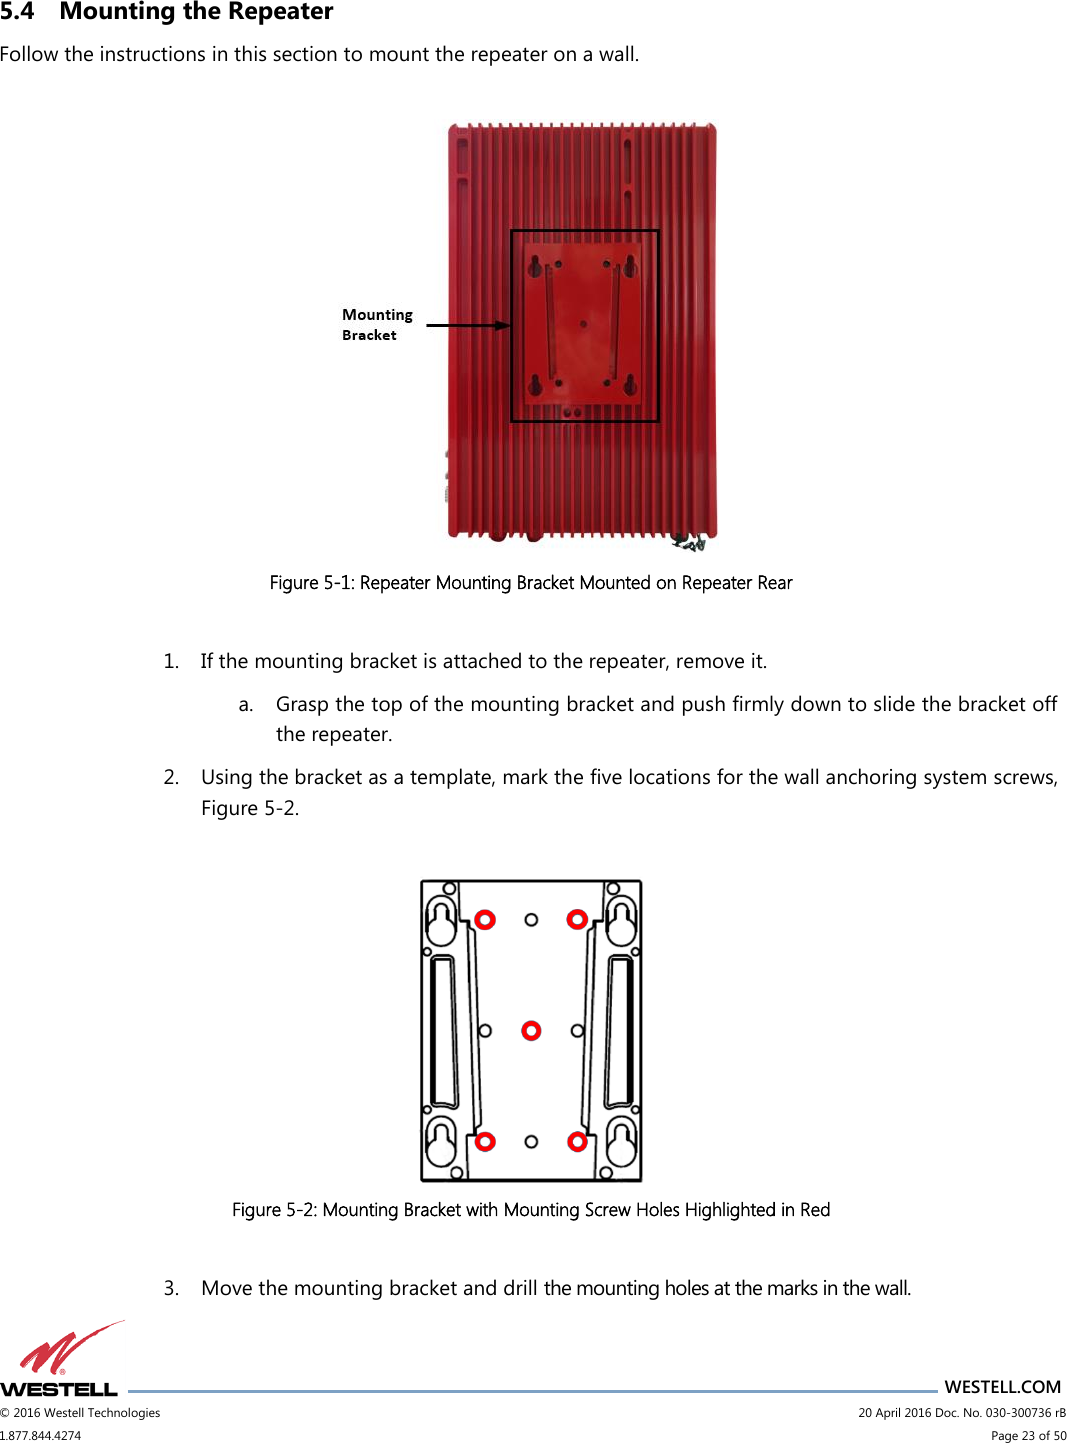                      WESTELL.COM © 2016 Westell Technologies                             20 April 2016 Doc. No. 030-300736 rB 1.877.844.4274                             Page 23 of 50  5.4 Mounting the Repeater Follow the instructions in this section to mount the repeater on a wall.   Figure 5-1: Repeater Mounting Bracket Mounted on Repeater Rear  1. If the mounting bracket is attached to the repeater, remove it. a. Grasp the top of the mounting bracket and push firmly down to slide the bracket off the repeater.  2. Using the bracket as a template, mark the five locations for the wall anchoring system screws, Figure 5-2.   Figure 5-2: Mounting Bracket with Mounting Screw Holes Highlighted in Red  3. Move the mounting bracket and drill the mounting holes at the marks in the wall. 